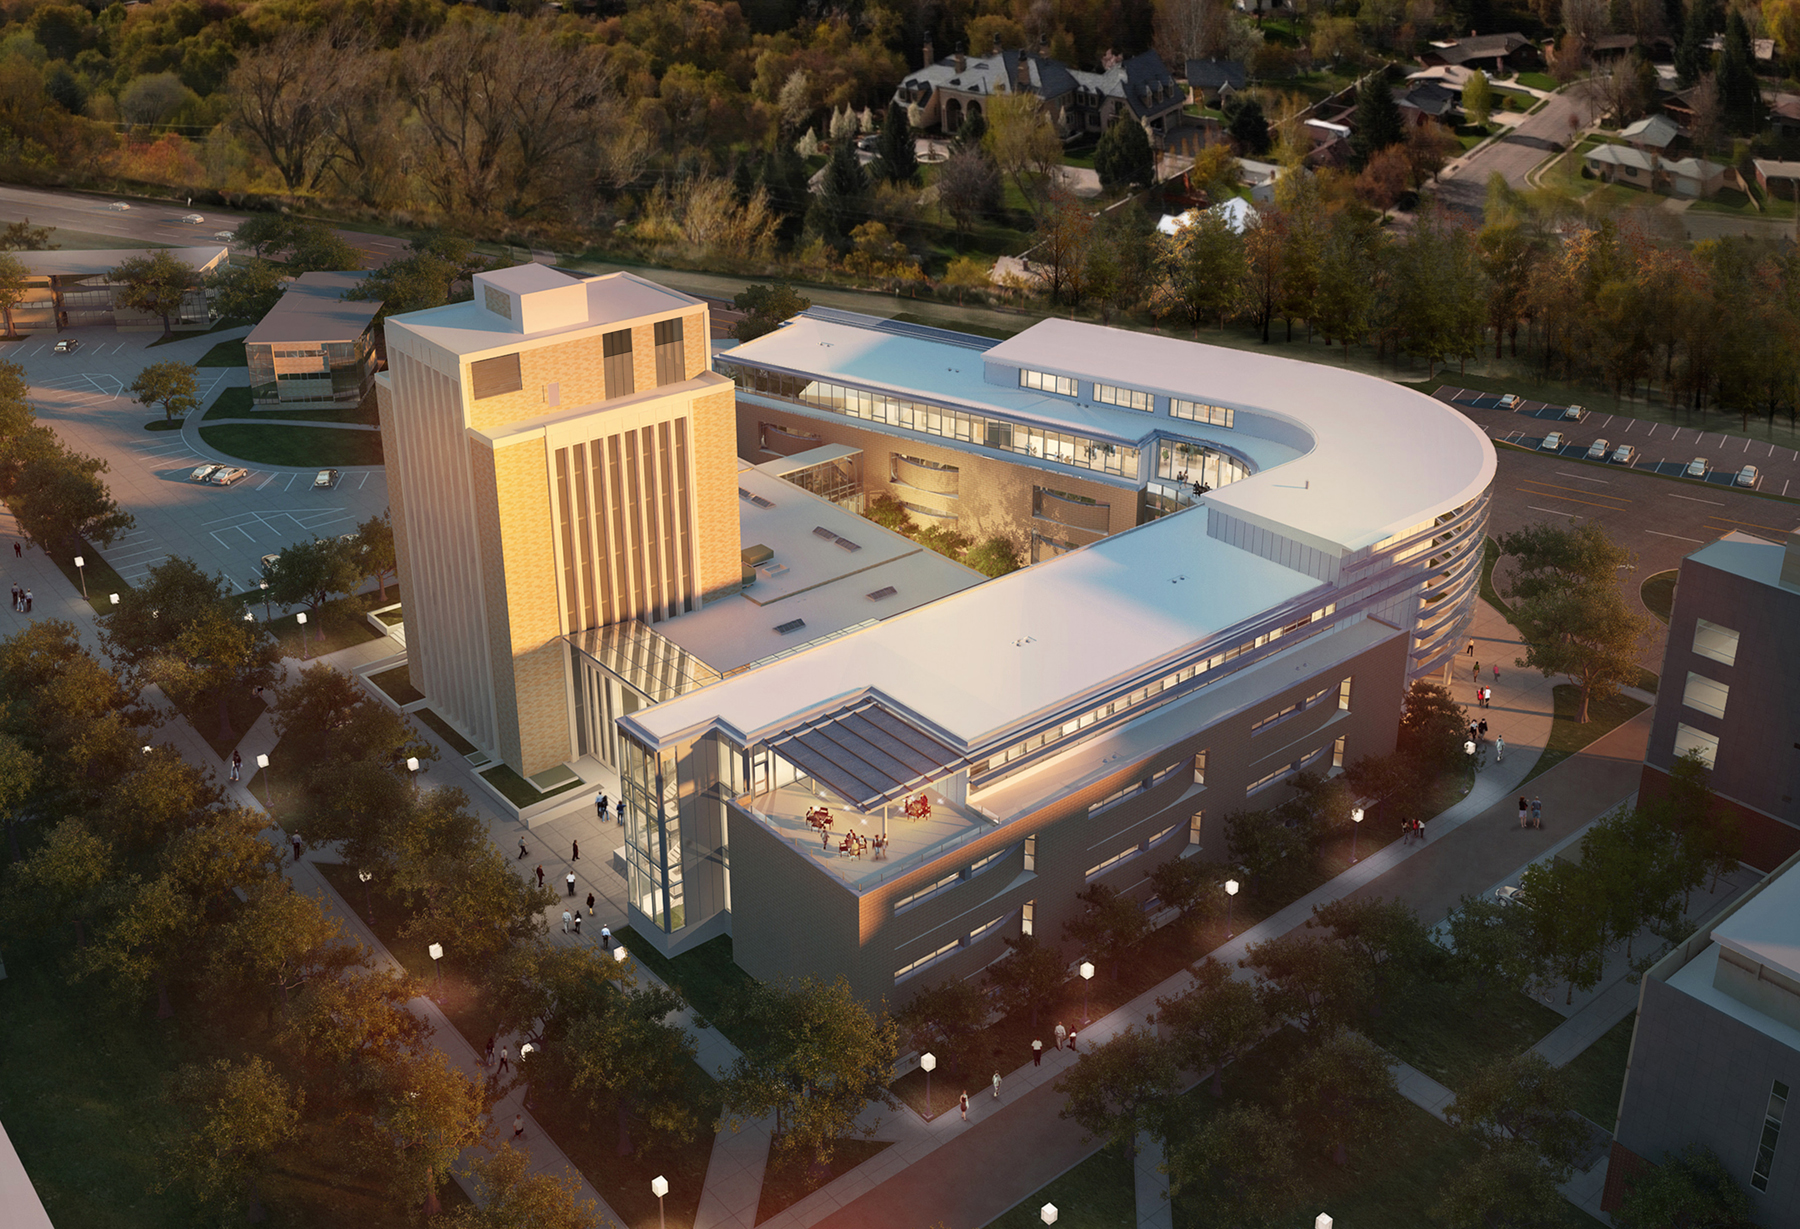 This is an artist's rendering of Huntsman Hall, which will be part of the Jon M. Huntsman School of Business.